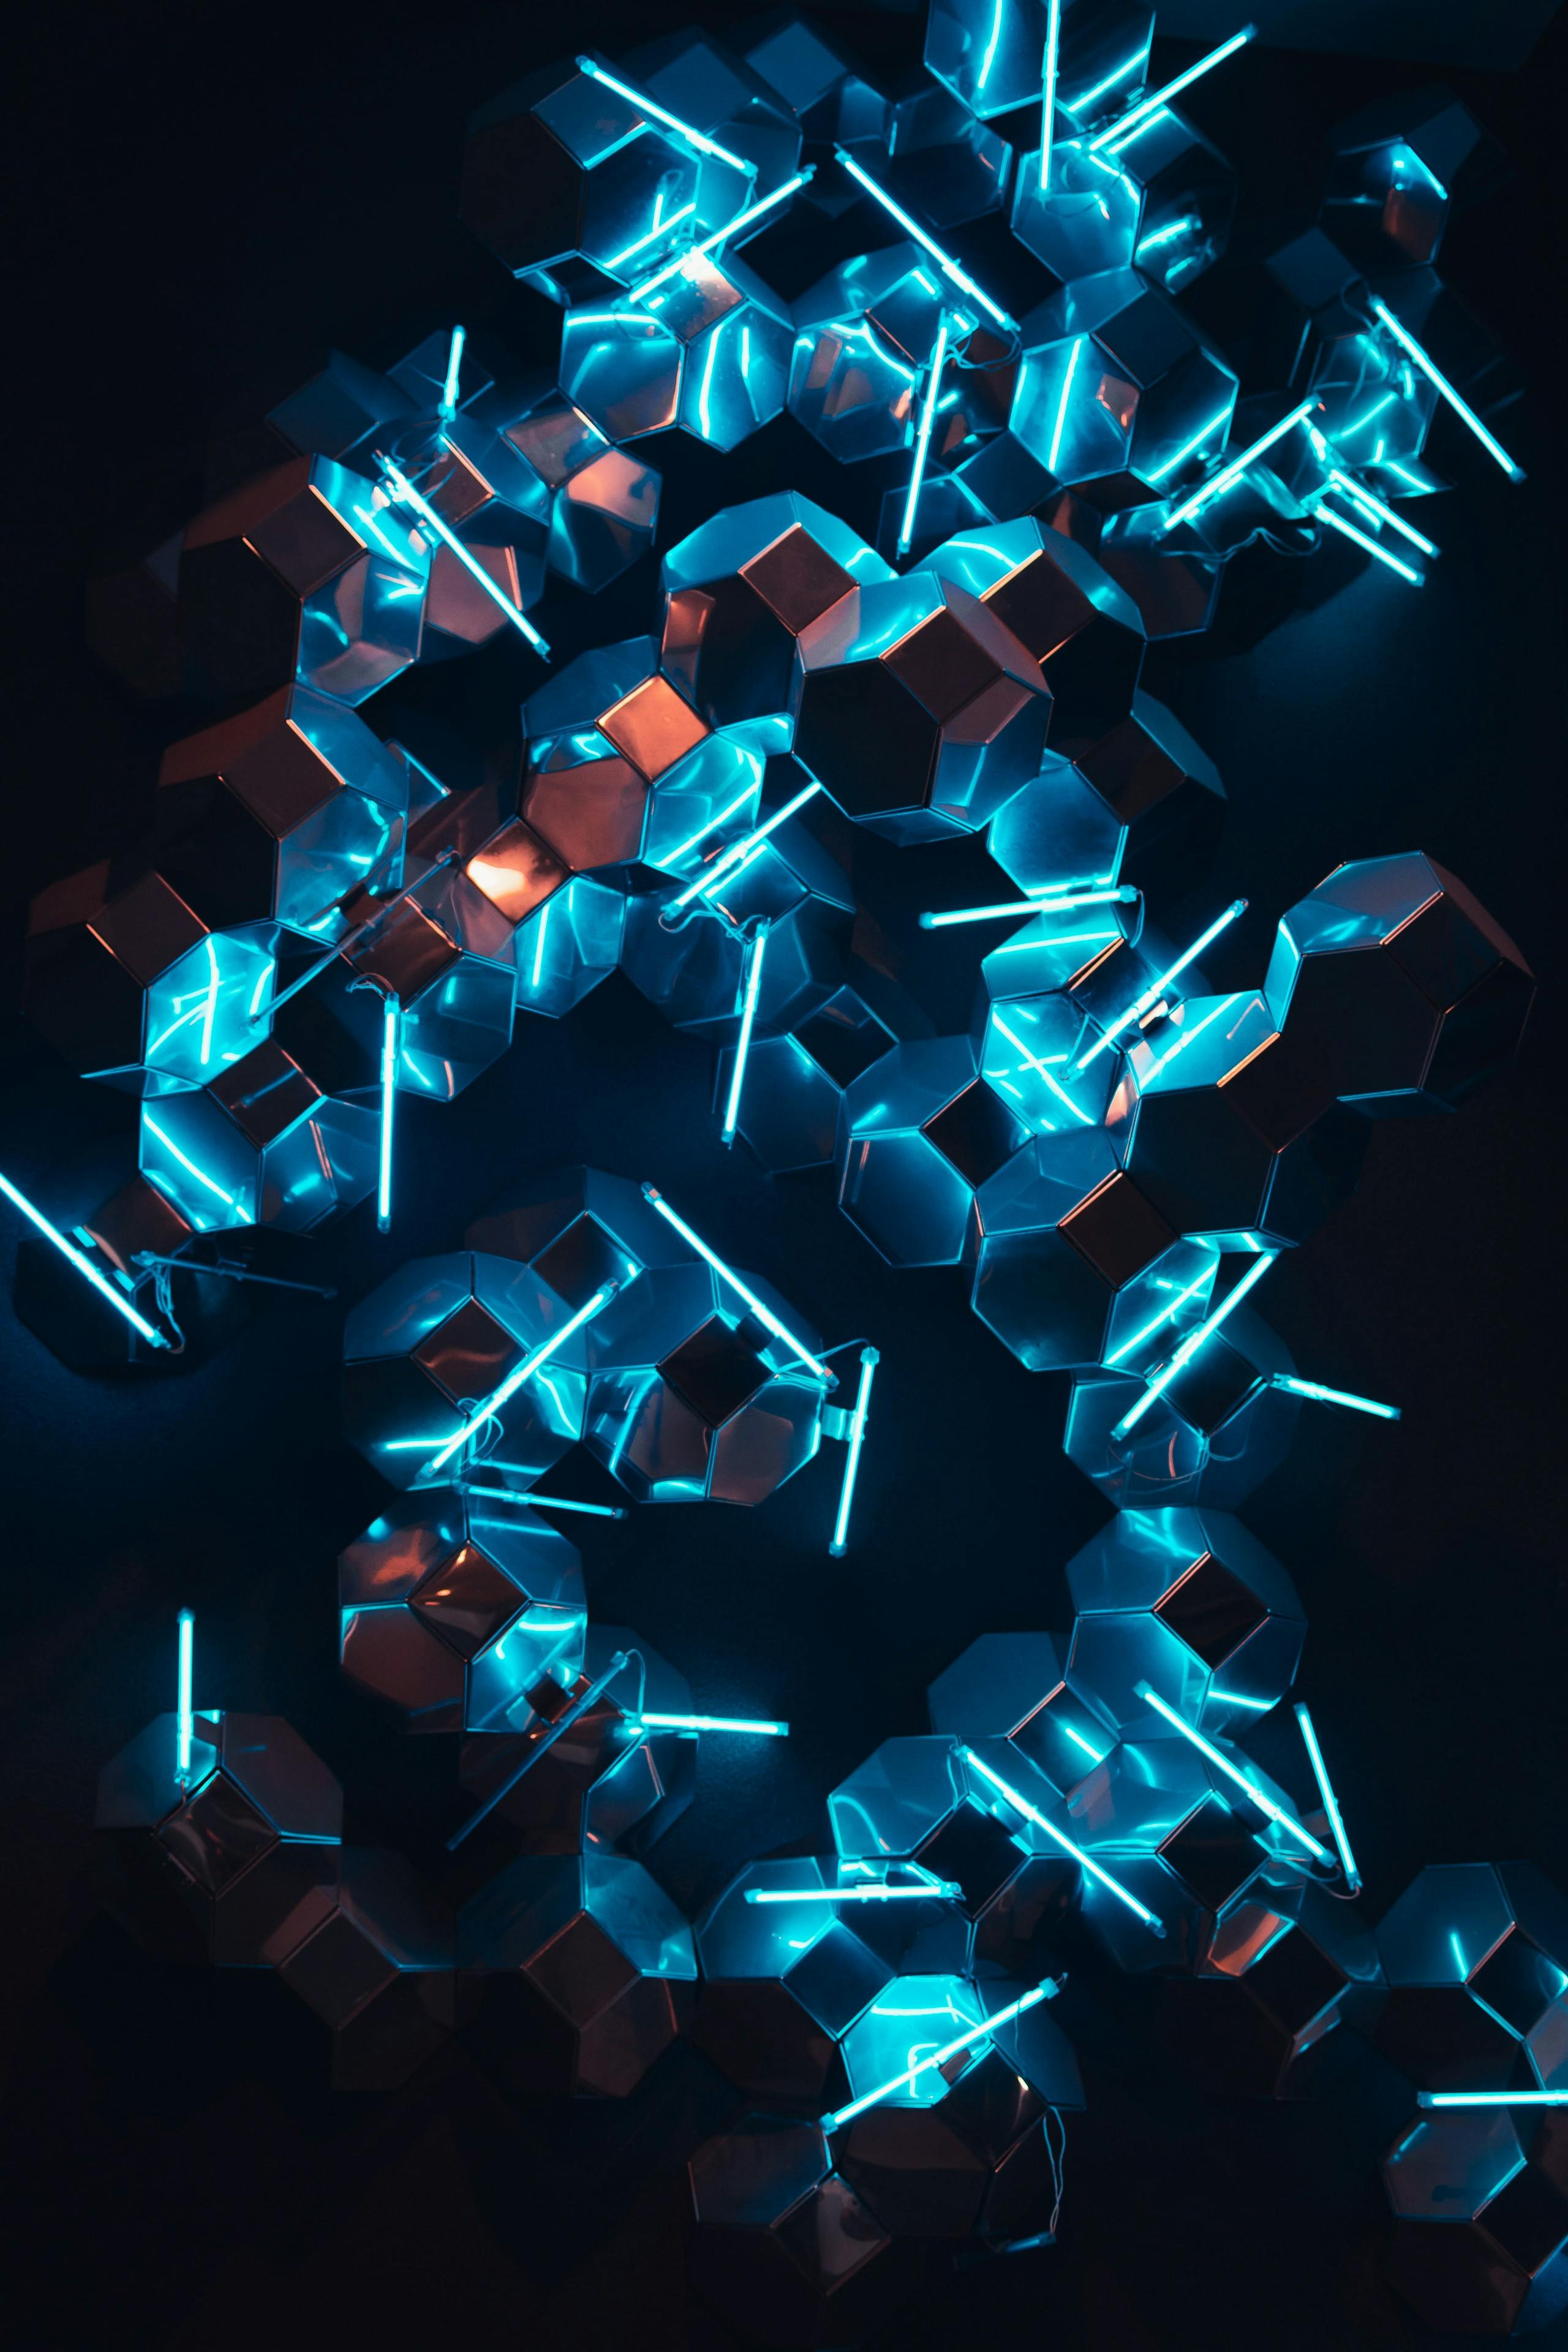 Abstract shards of glass lit in blue and orange 